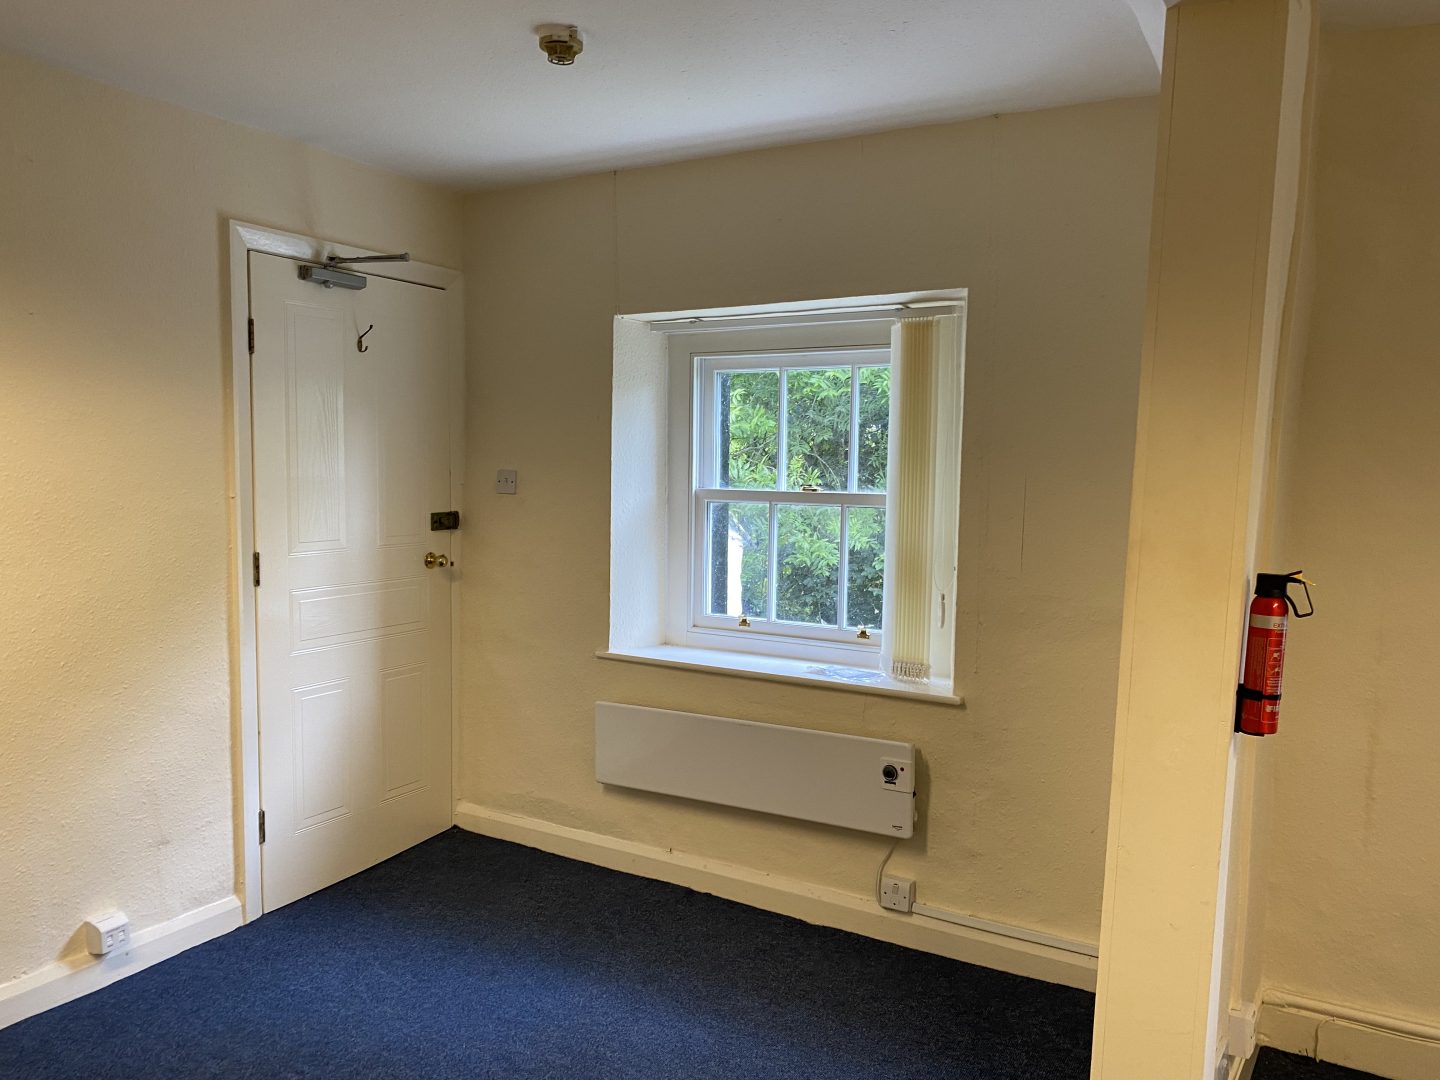 Rooms 1 & 2 Redhills House, Redhills Business Park, Penrith